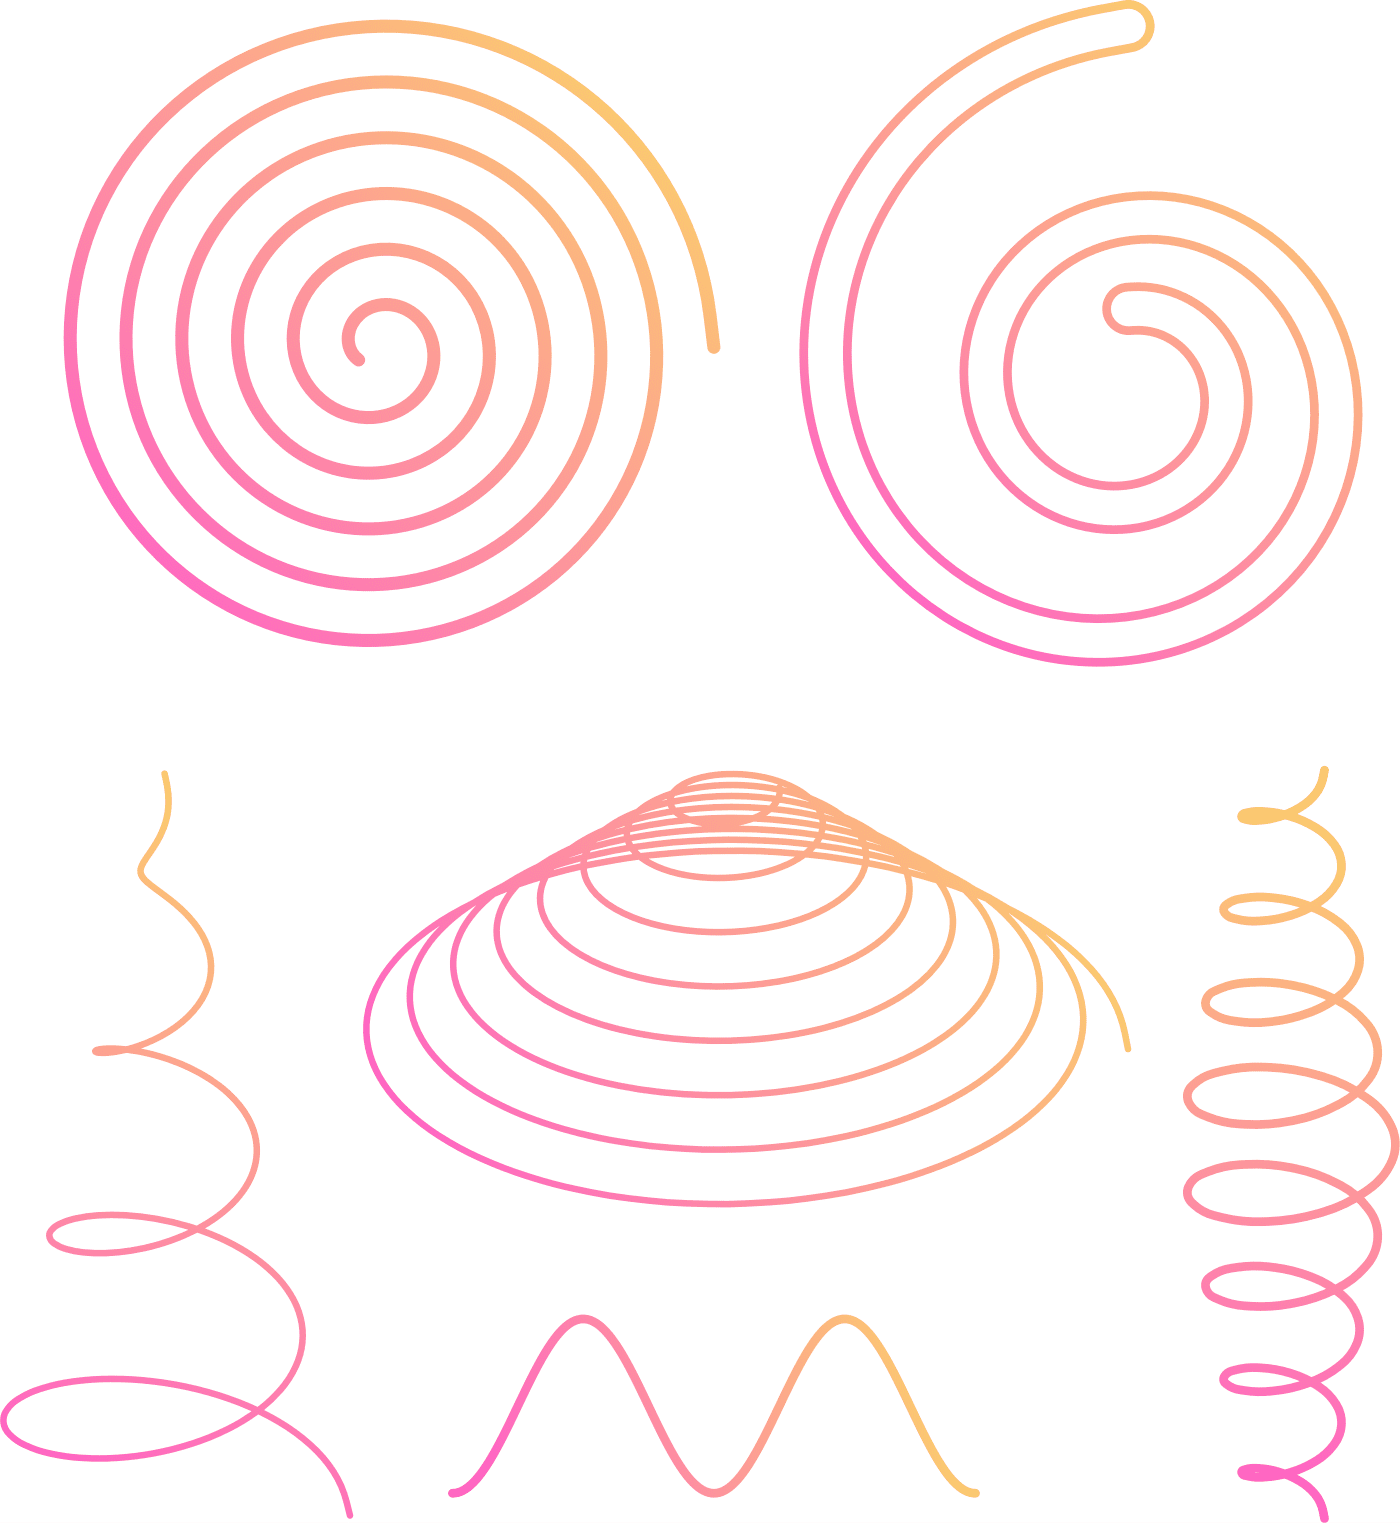 This Is A Rough Sketch Of A Spiral Pattern Royalty Free SVG Cliparts  Vectors And Stock Illustration Image 118209689